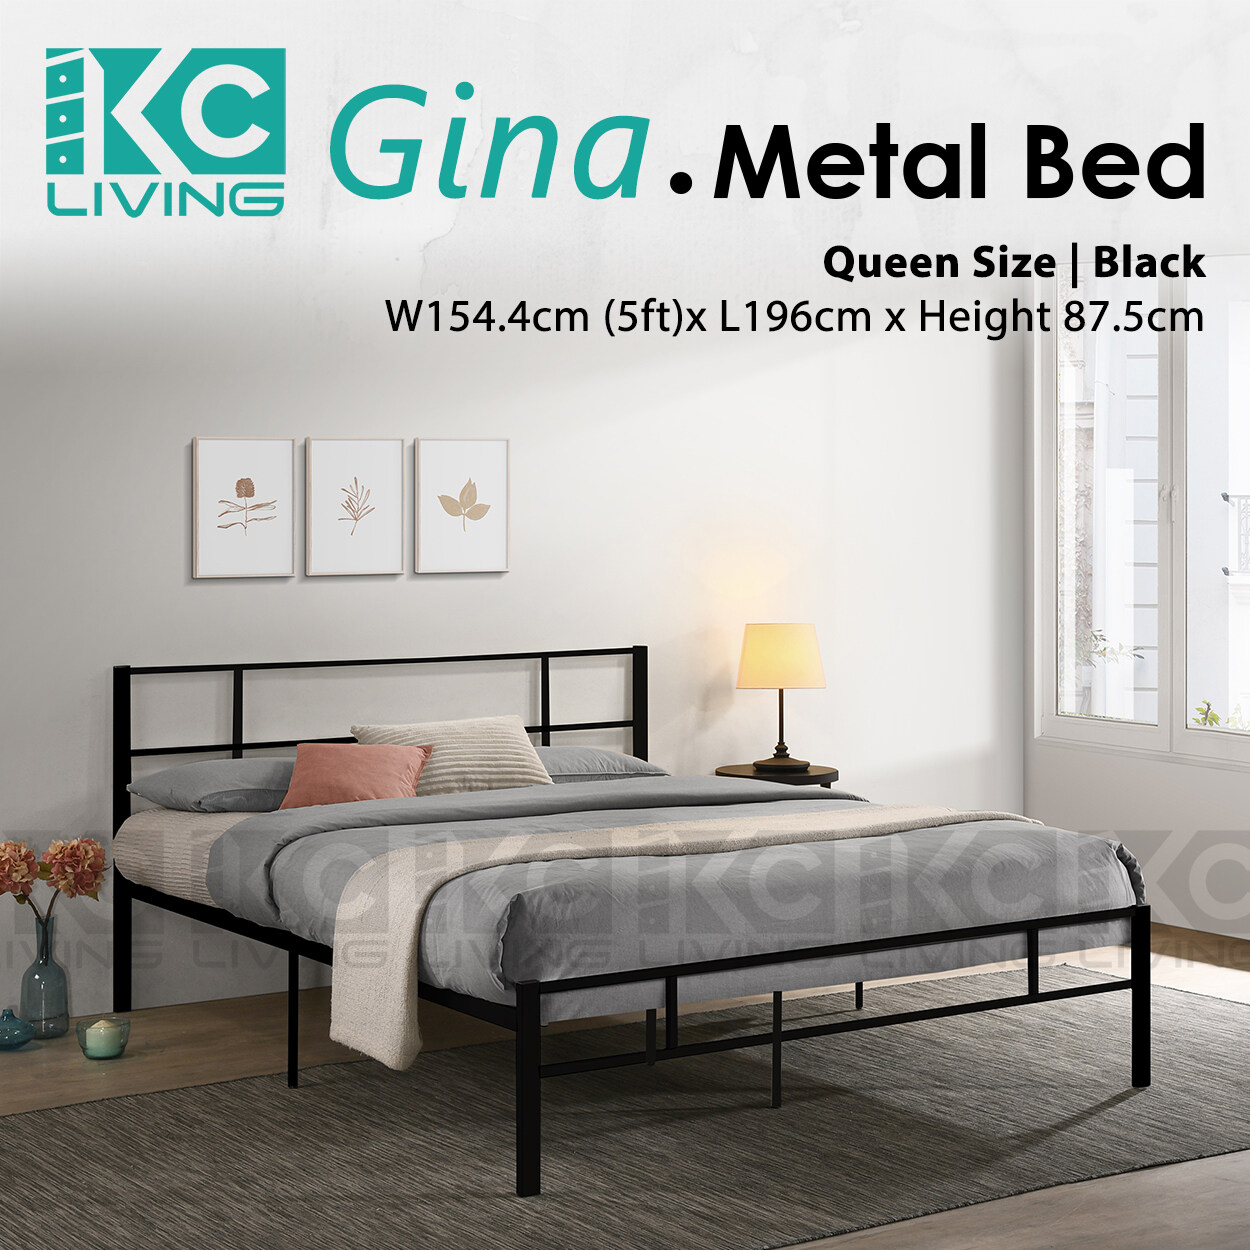 [KCL] Gina Metal Bed Single & Queen Metal Bed / Quality Steel / Easy Assembly / White / Super Base / Katil Besi Murah